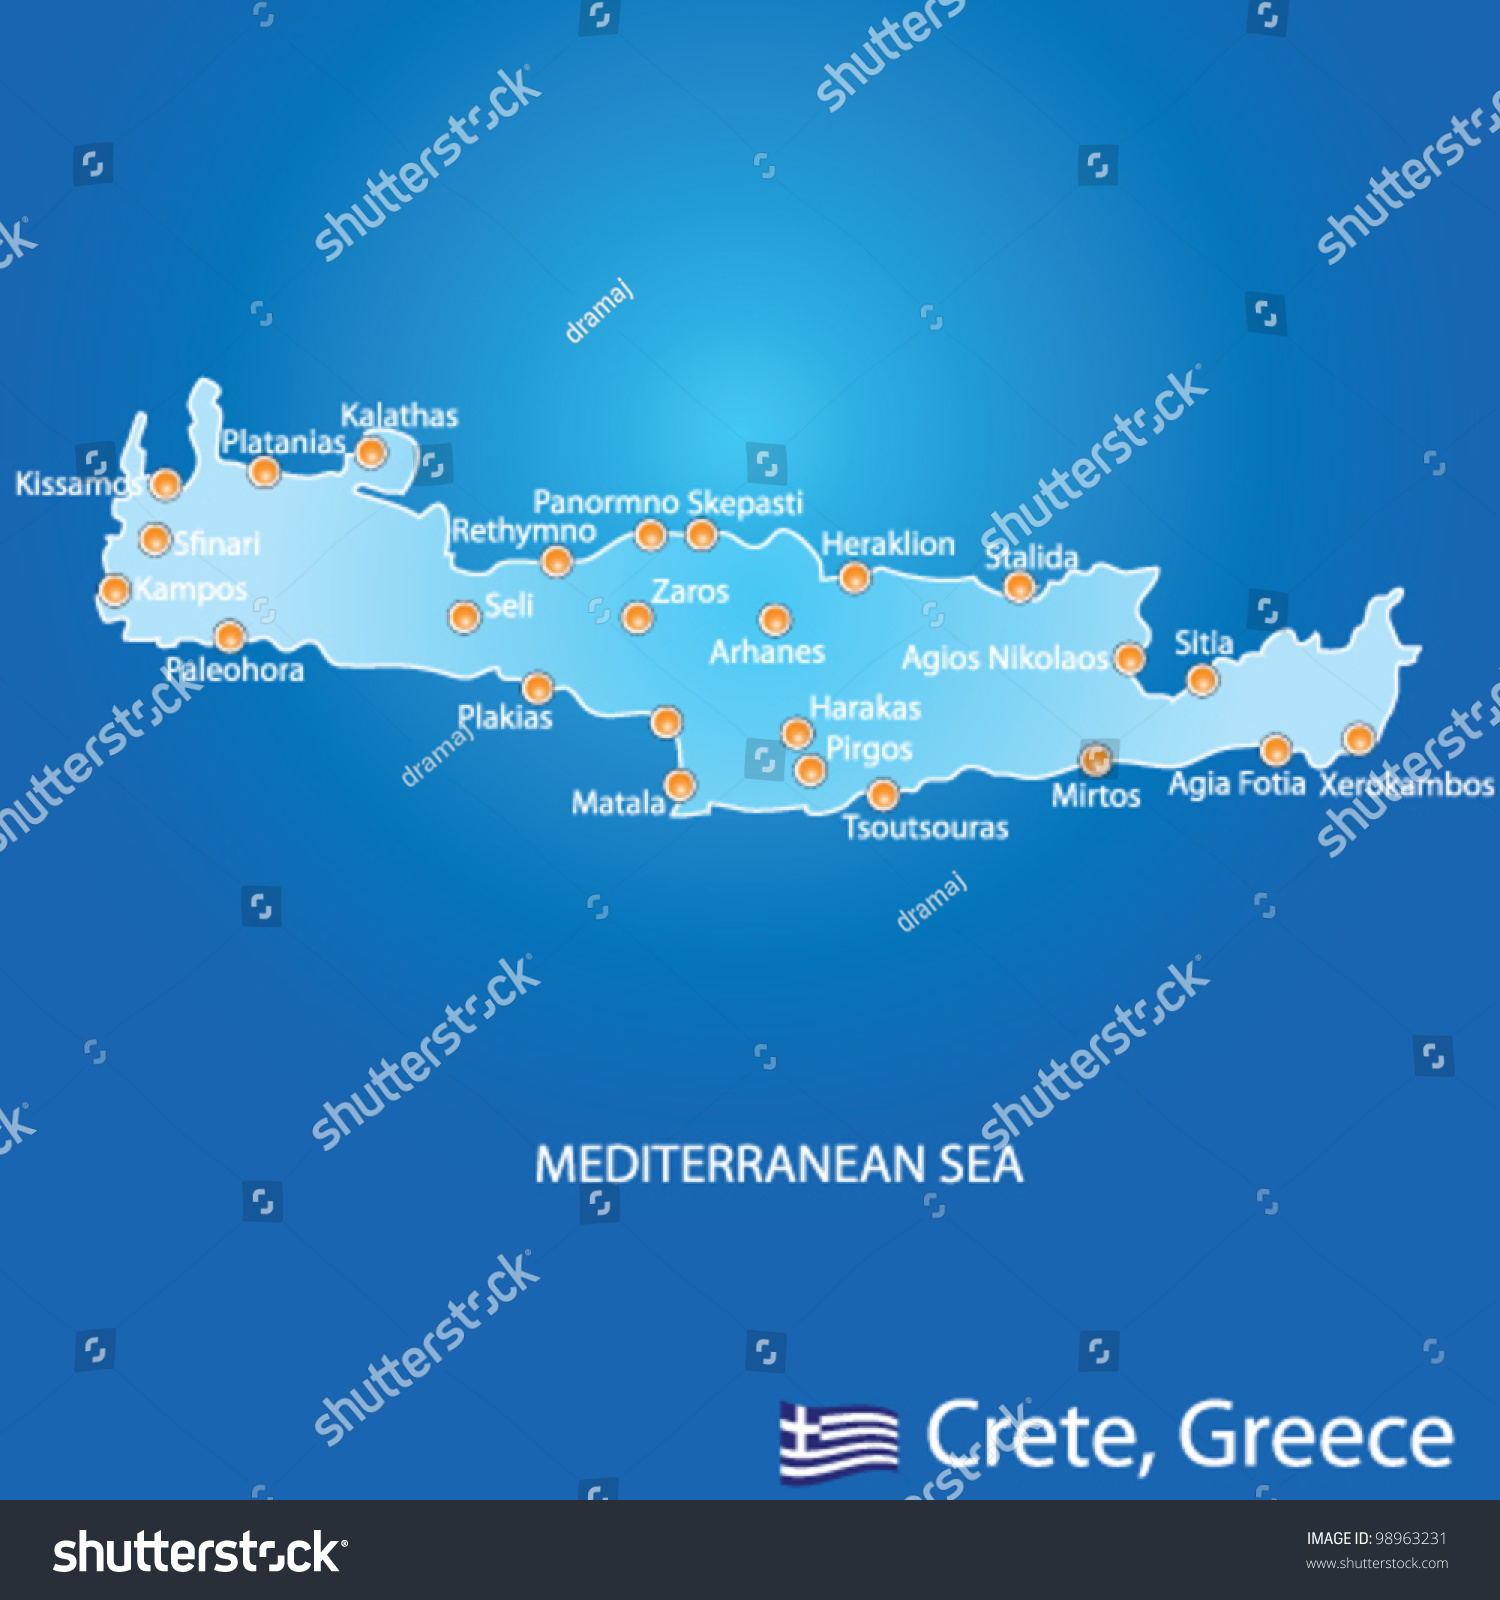 SVG of Island of Crete in Greece map on blue background svg